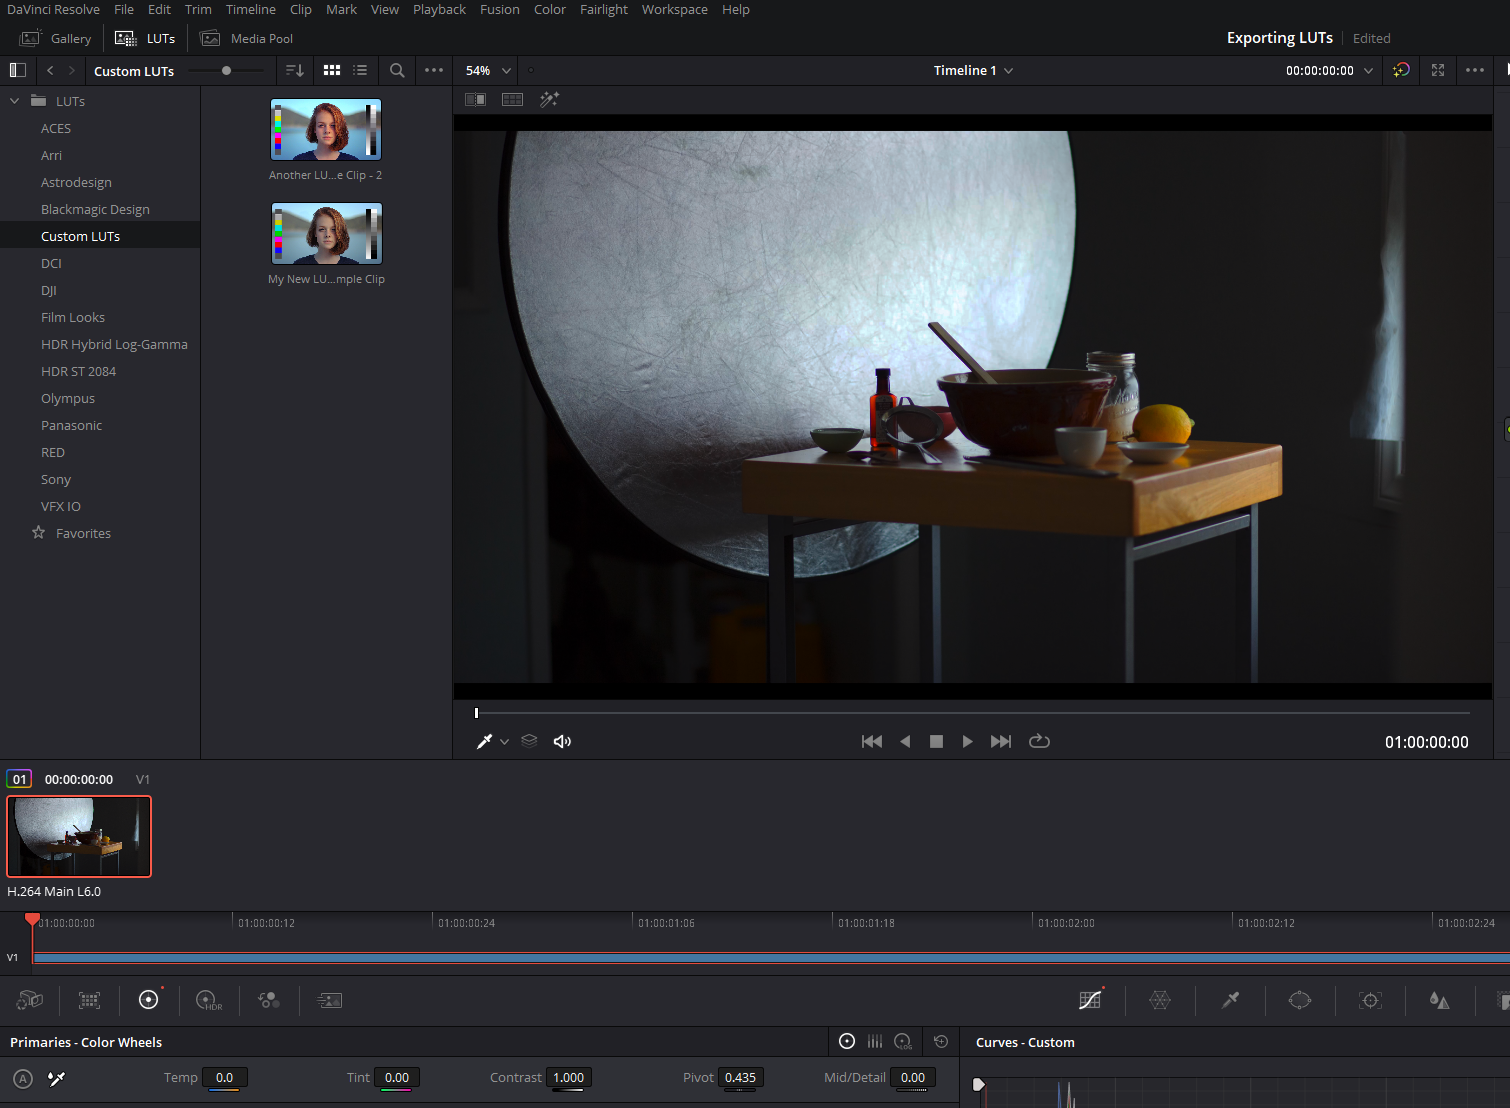 How to edit a LUT in Resolve.